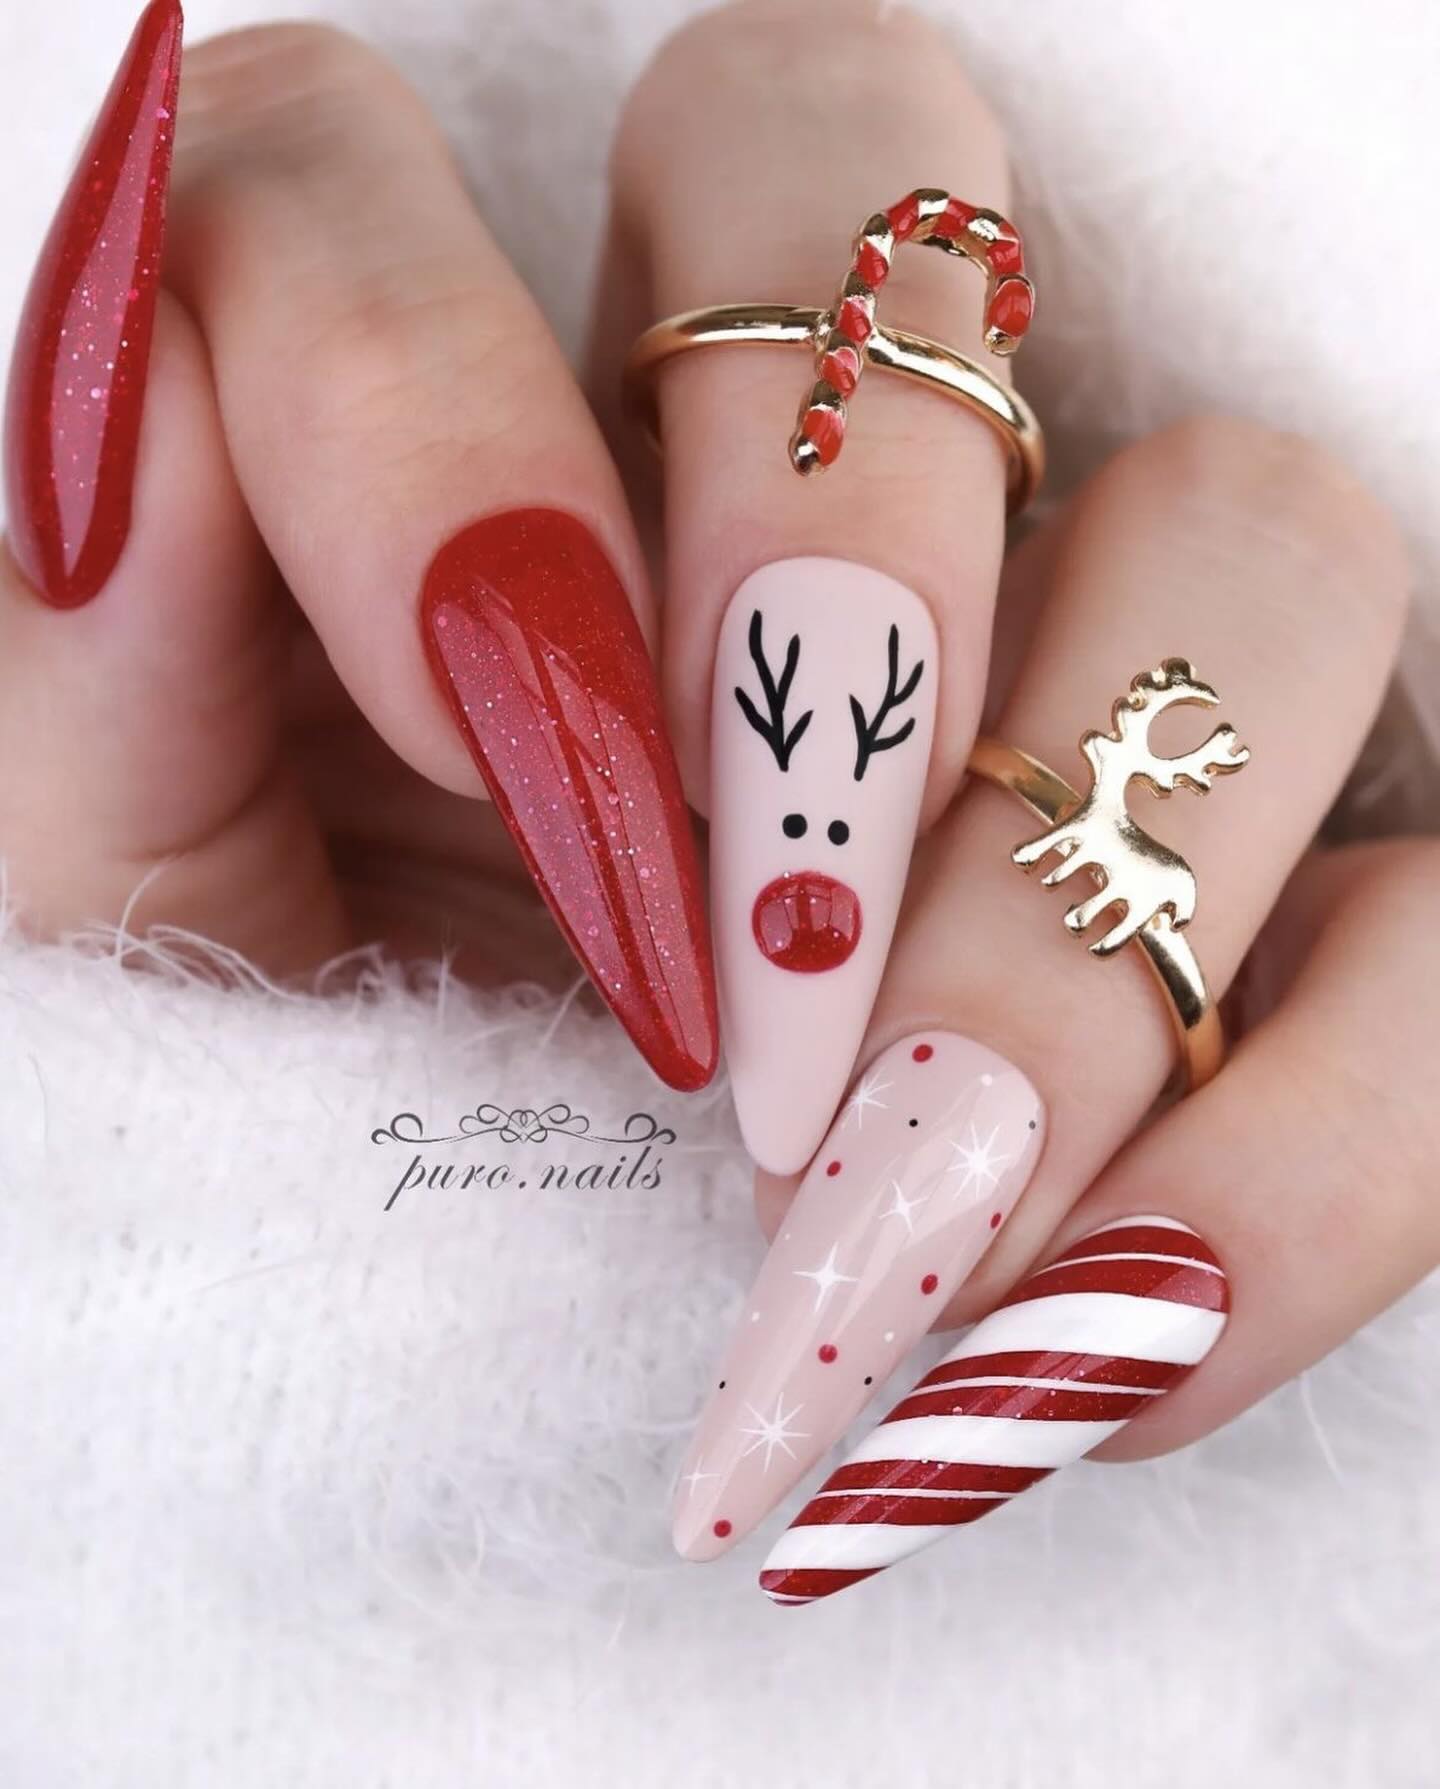 100+ Gorgeous Winter Nail Designs And Ideas images 87